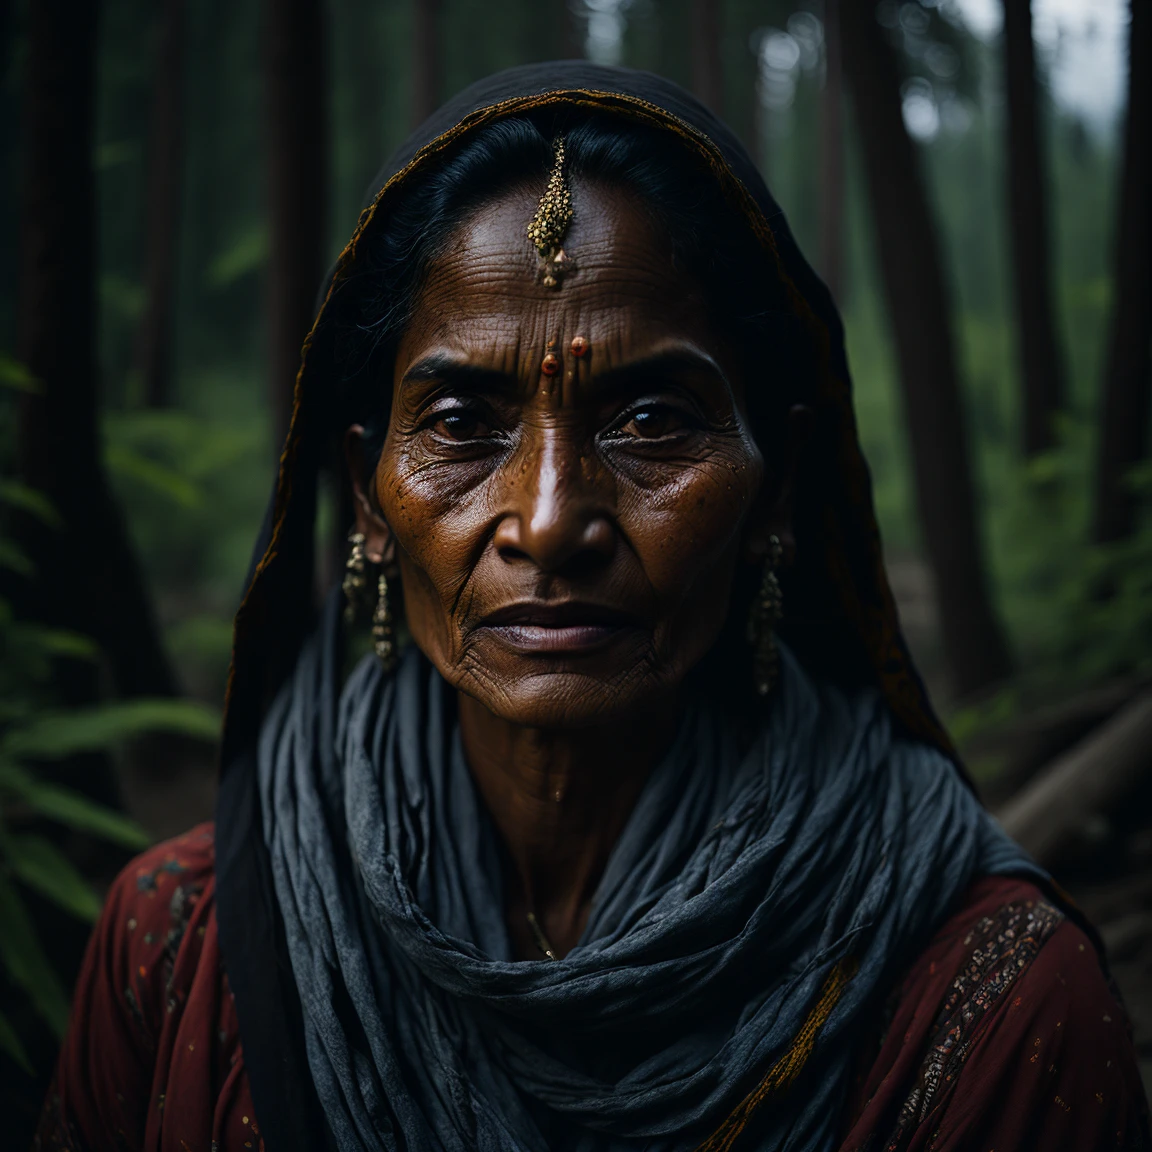 portrait oF an indian village woman in Forest in Himachal pradesh, clear Facial Features, 電影般的, 35毫米鏡頭, F/1.8, 重点照明, 全域照明